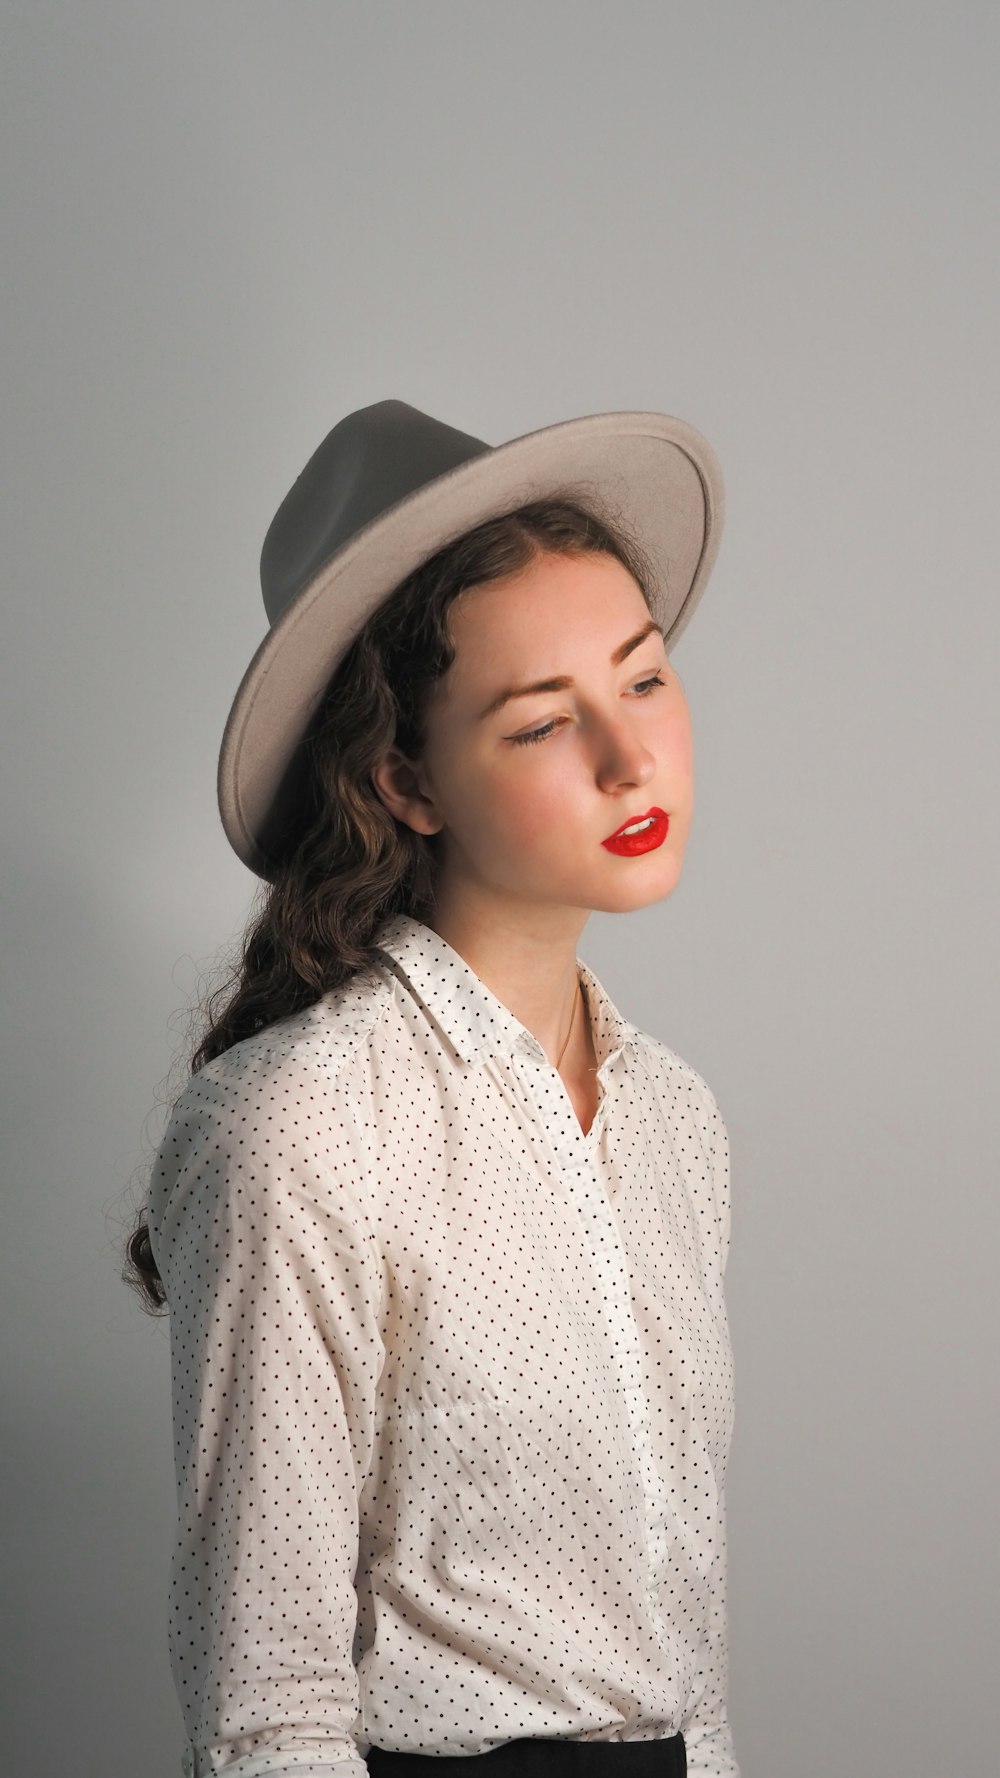 woman in white and black button up shirt wearing brown hat